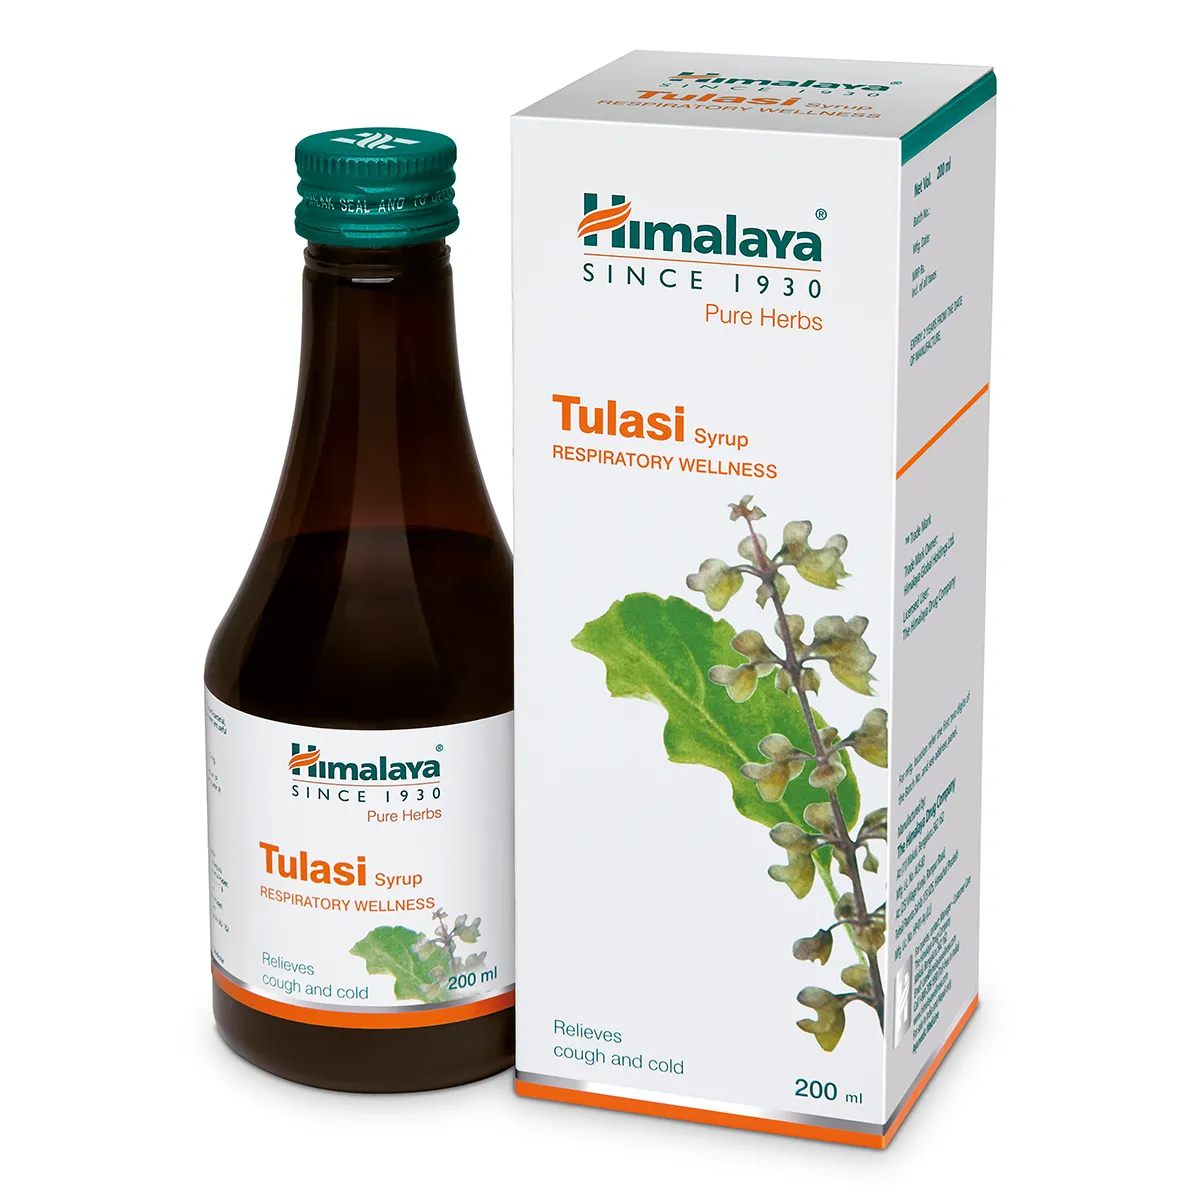 Himalaya Liv.52 DS Syrup, 100 ml Price, Uses, Side Effects, Composition -  Apollo Pharmacy